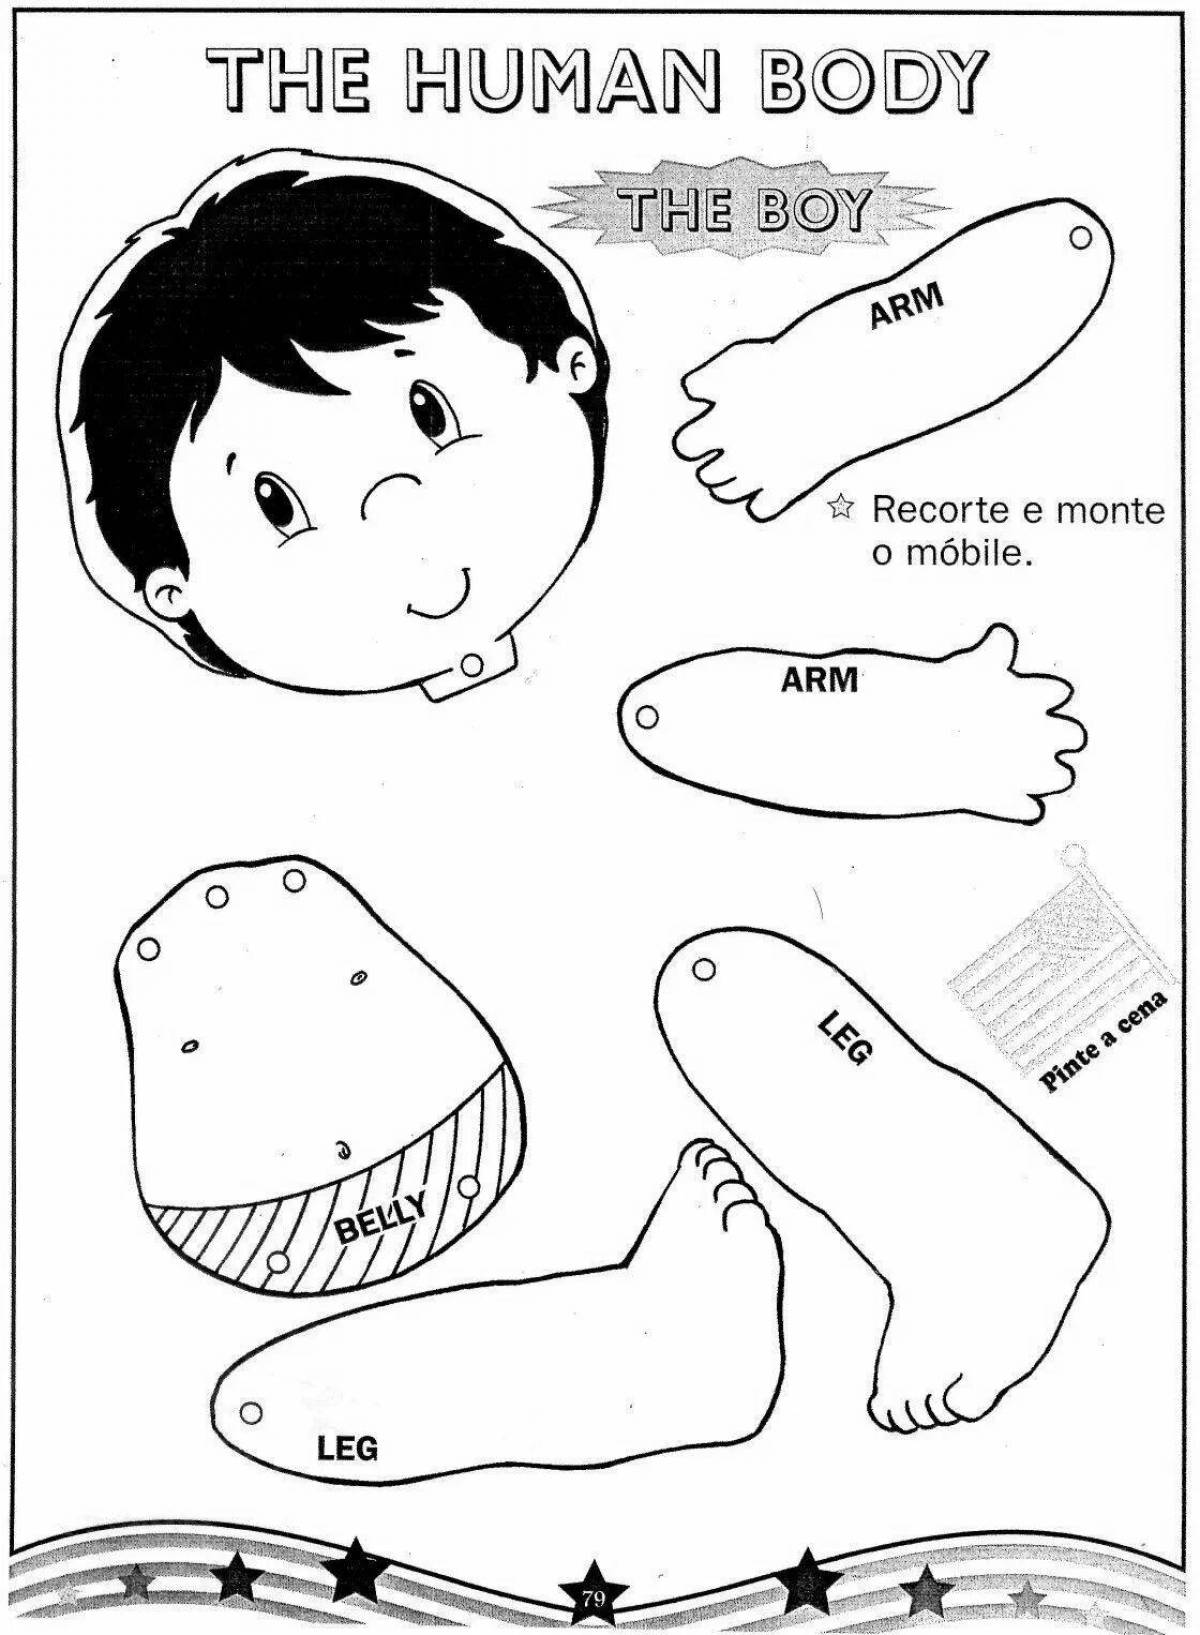 Body parts in english for kids #8